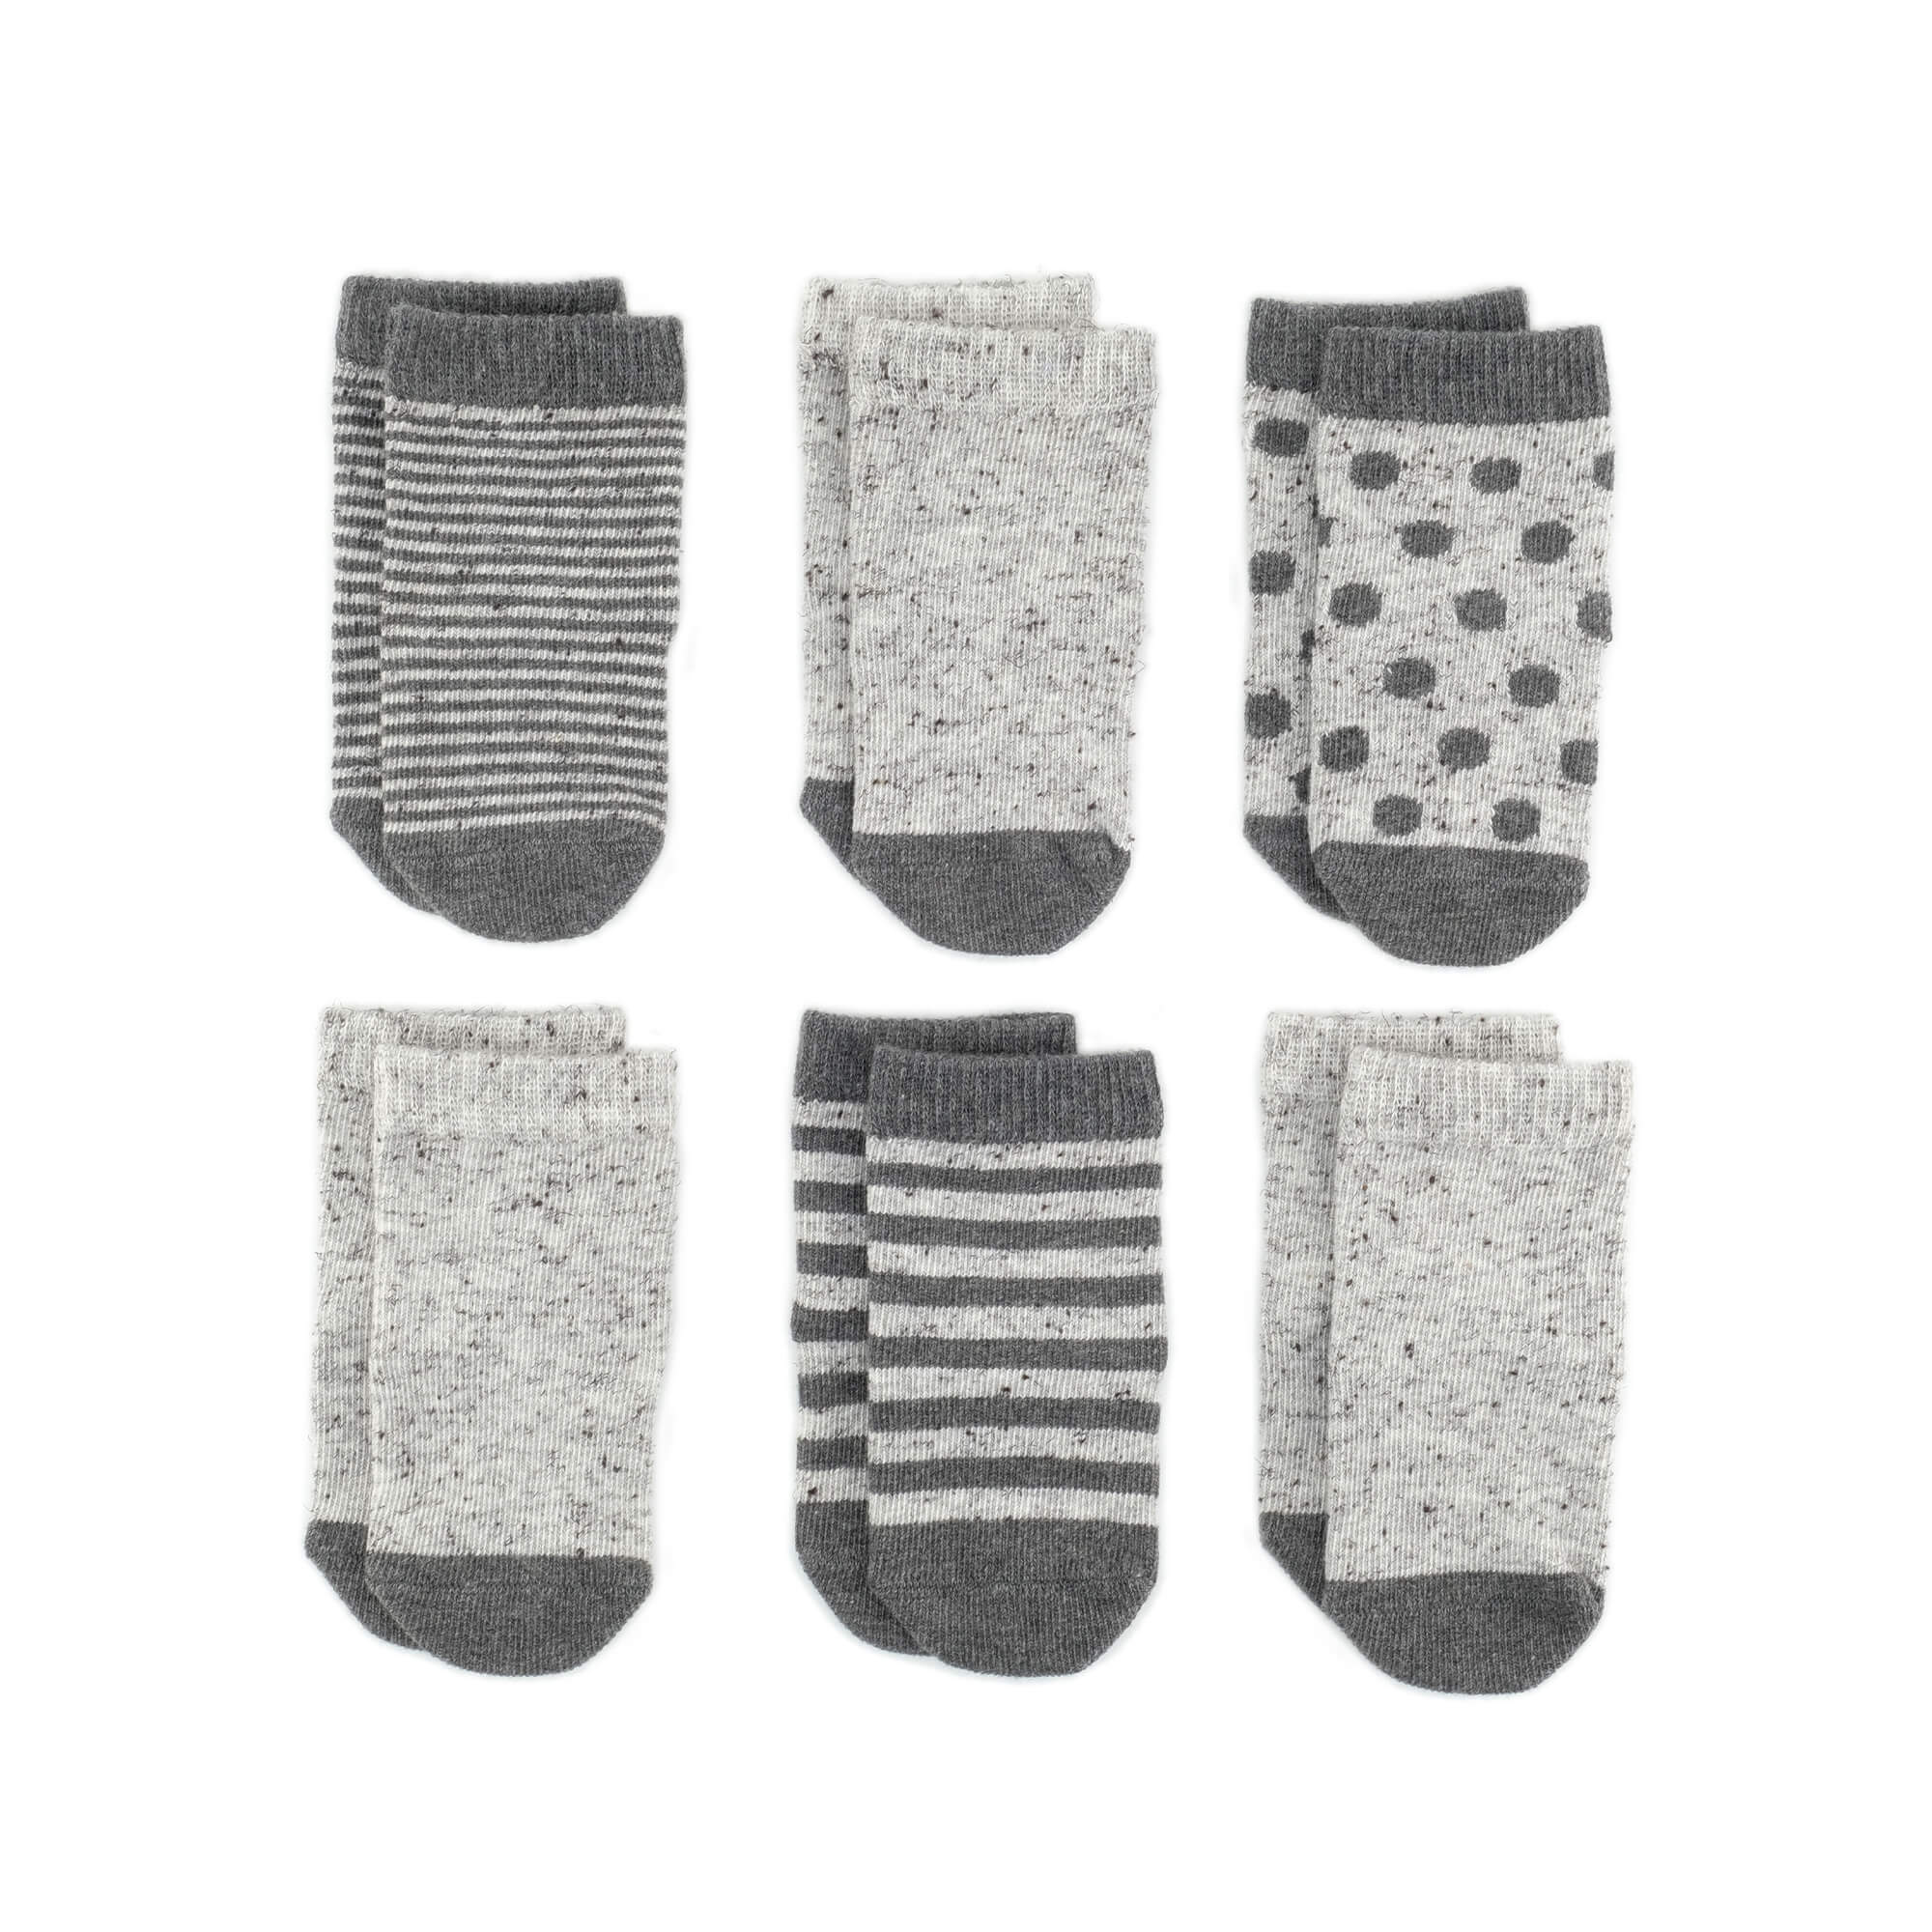 Baby Socks - New York Etiquette Baby Socks Gift Box - Heather grey ecru chic Baby Socks - product top view⎪Lil'Etiquette Clothiers